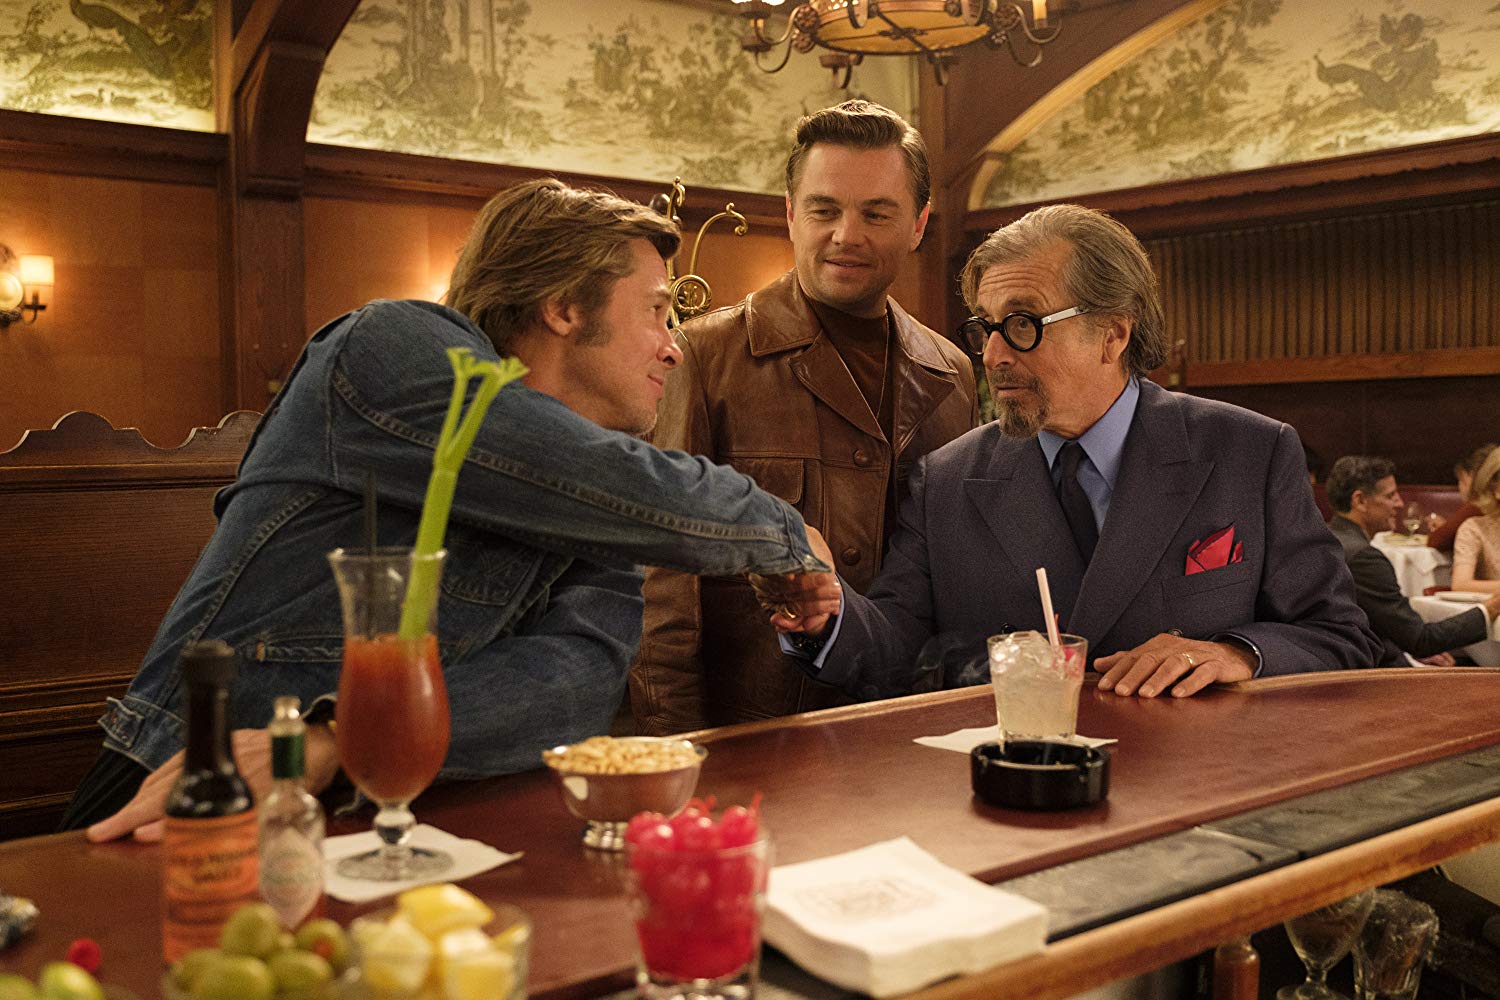 REVIEW: Once Upon a Time in Hollywood